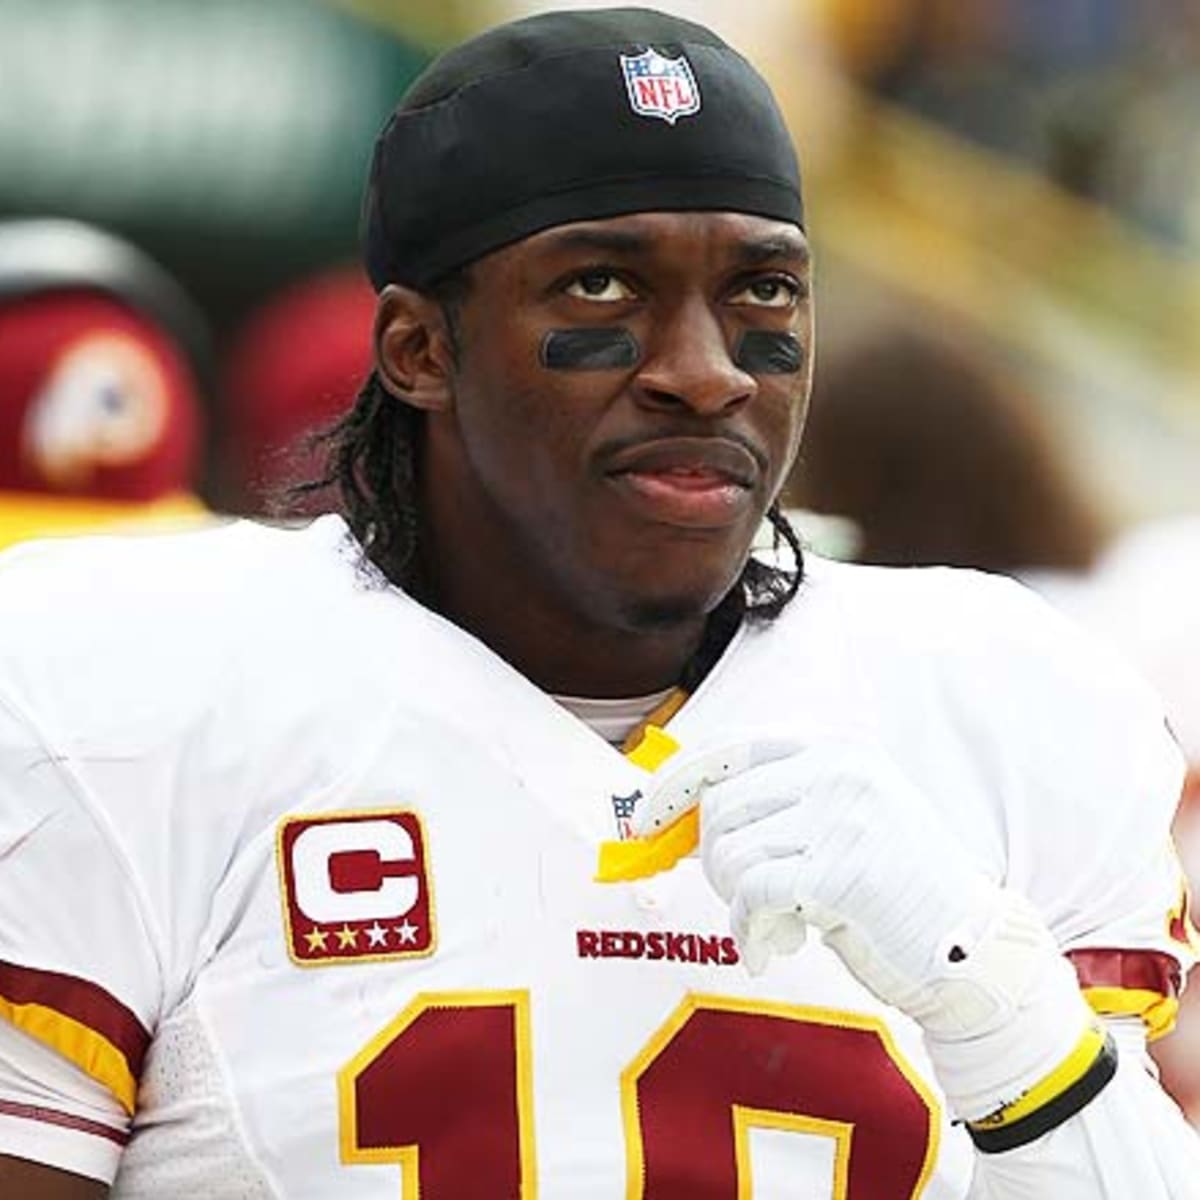 TIME for Thanks: Here's What Robert Griffin III Is Thankful For